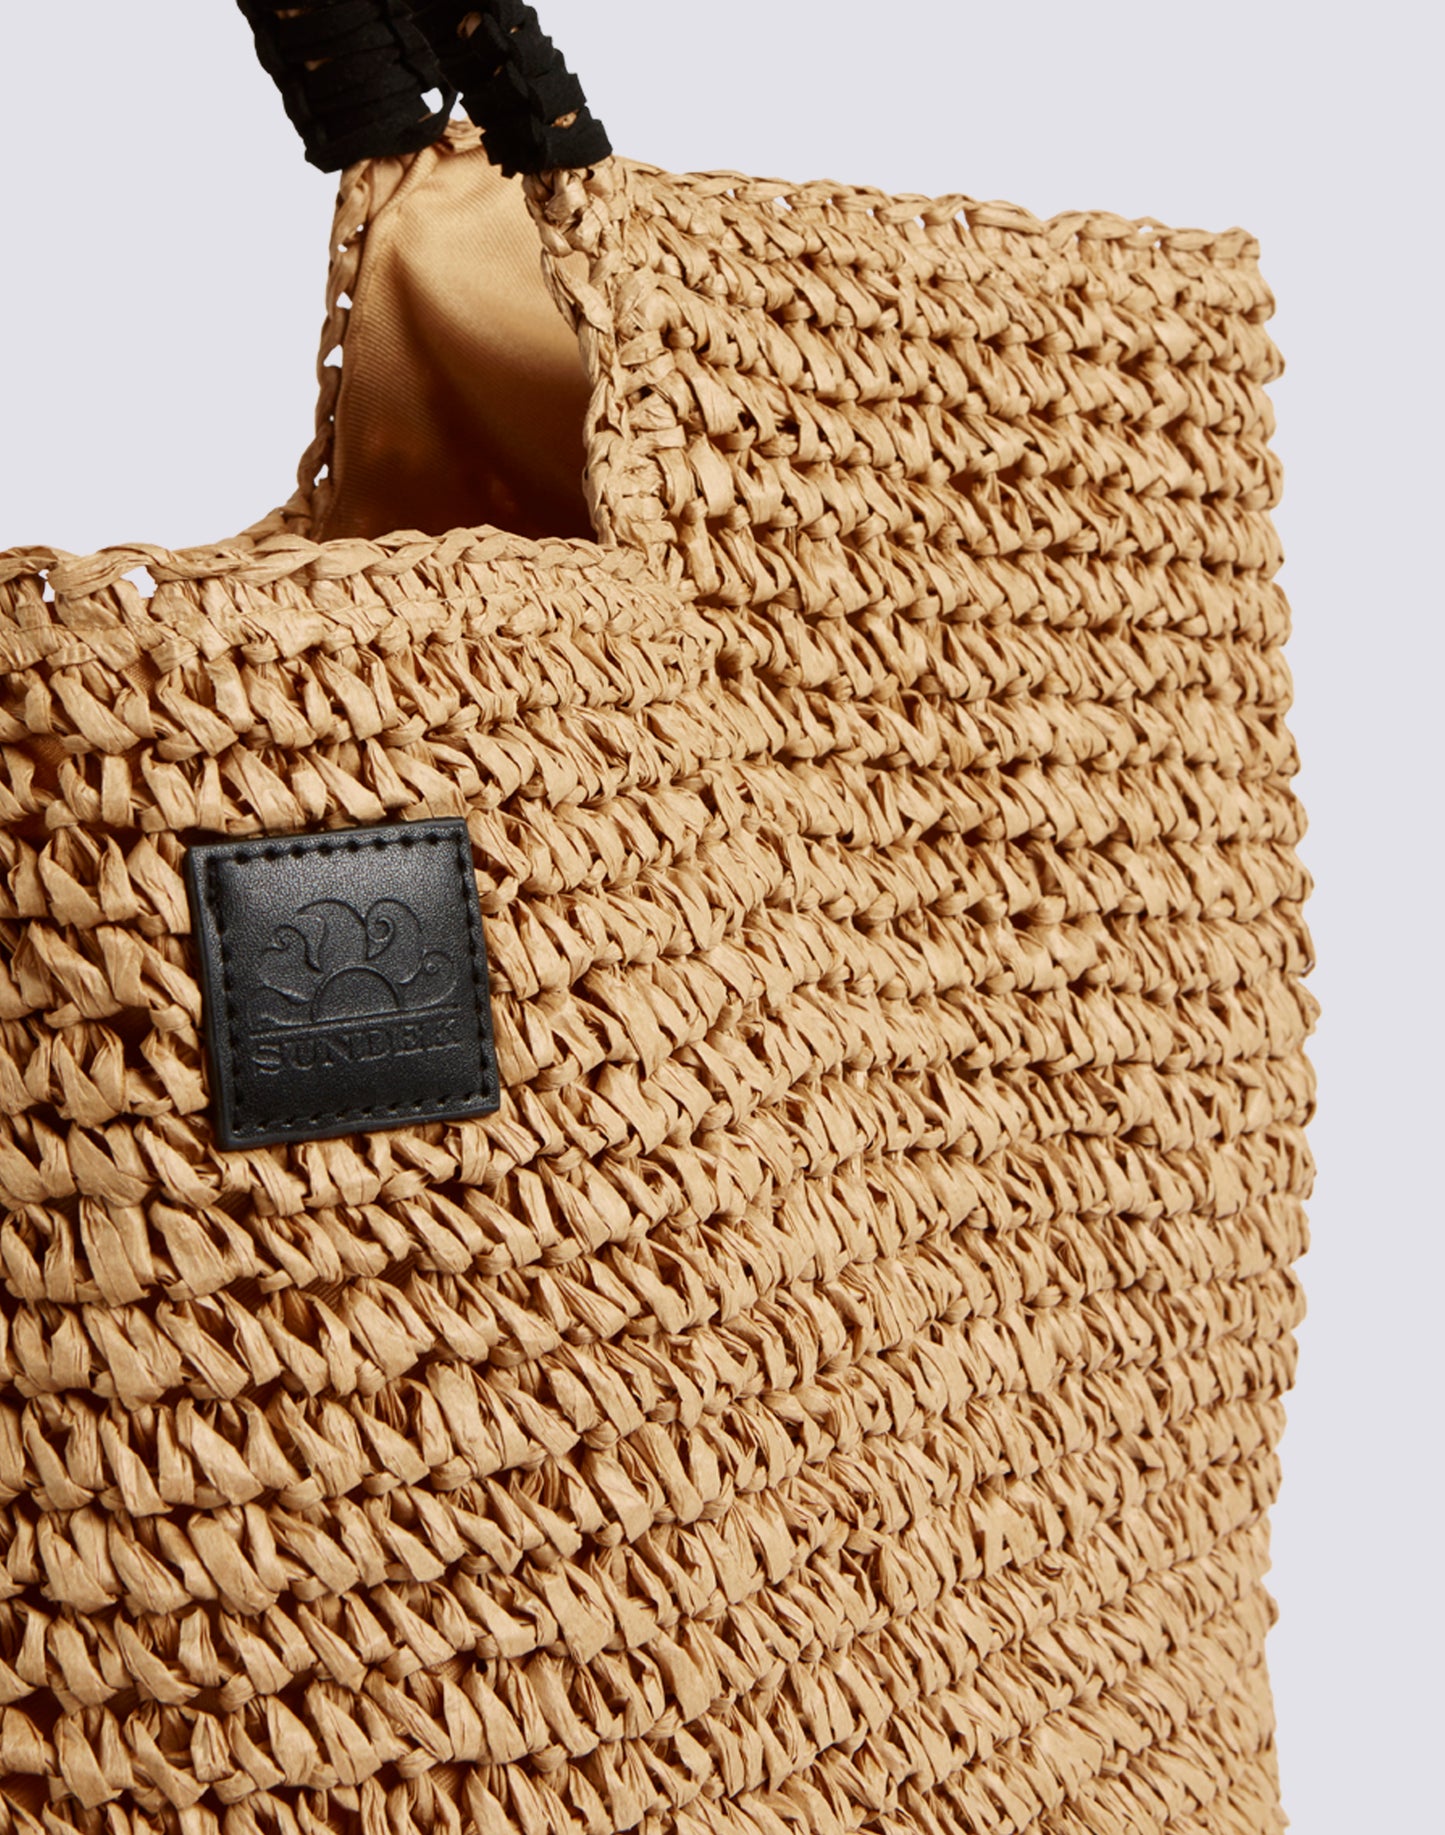 LARGE WOVEN PAPER STRAW BAG